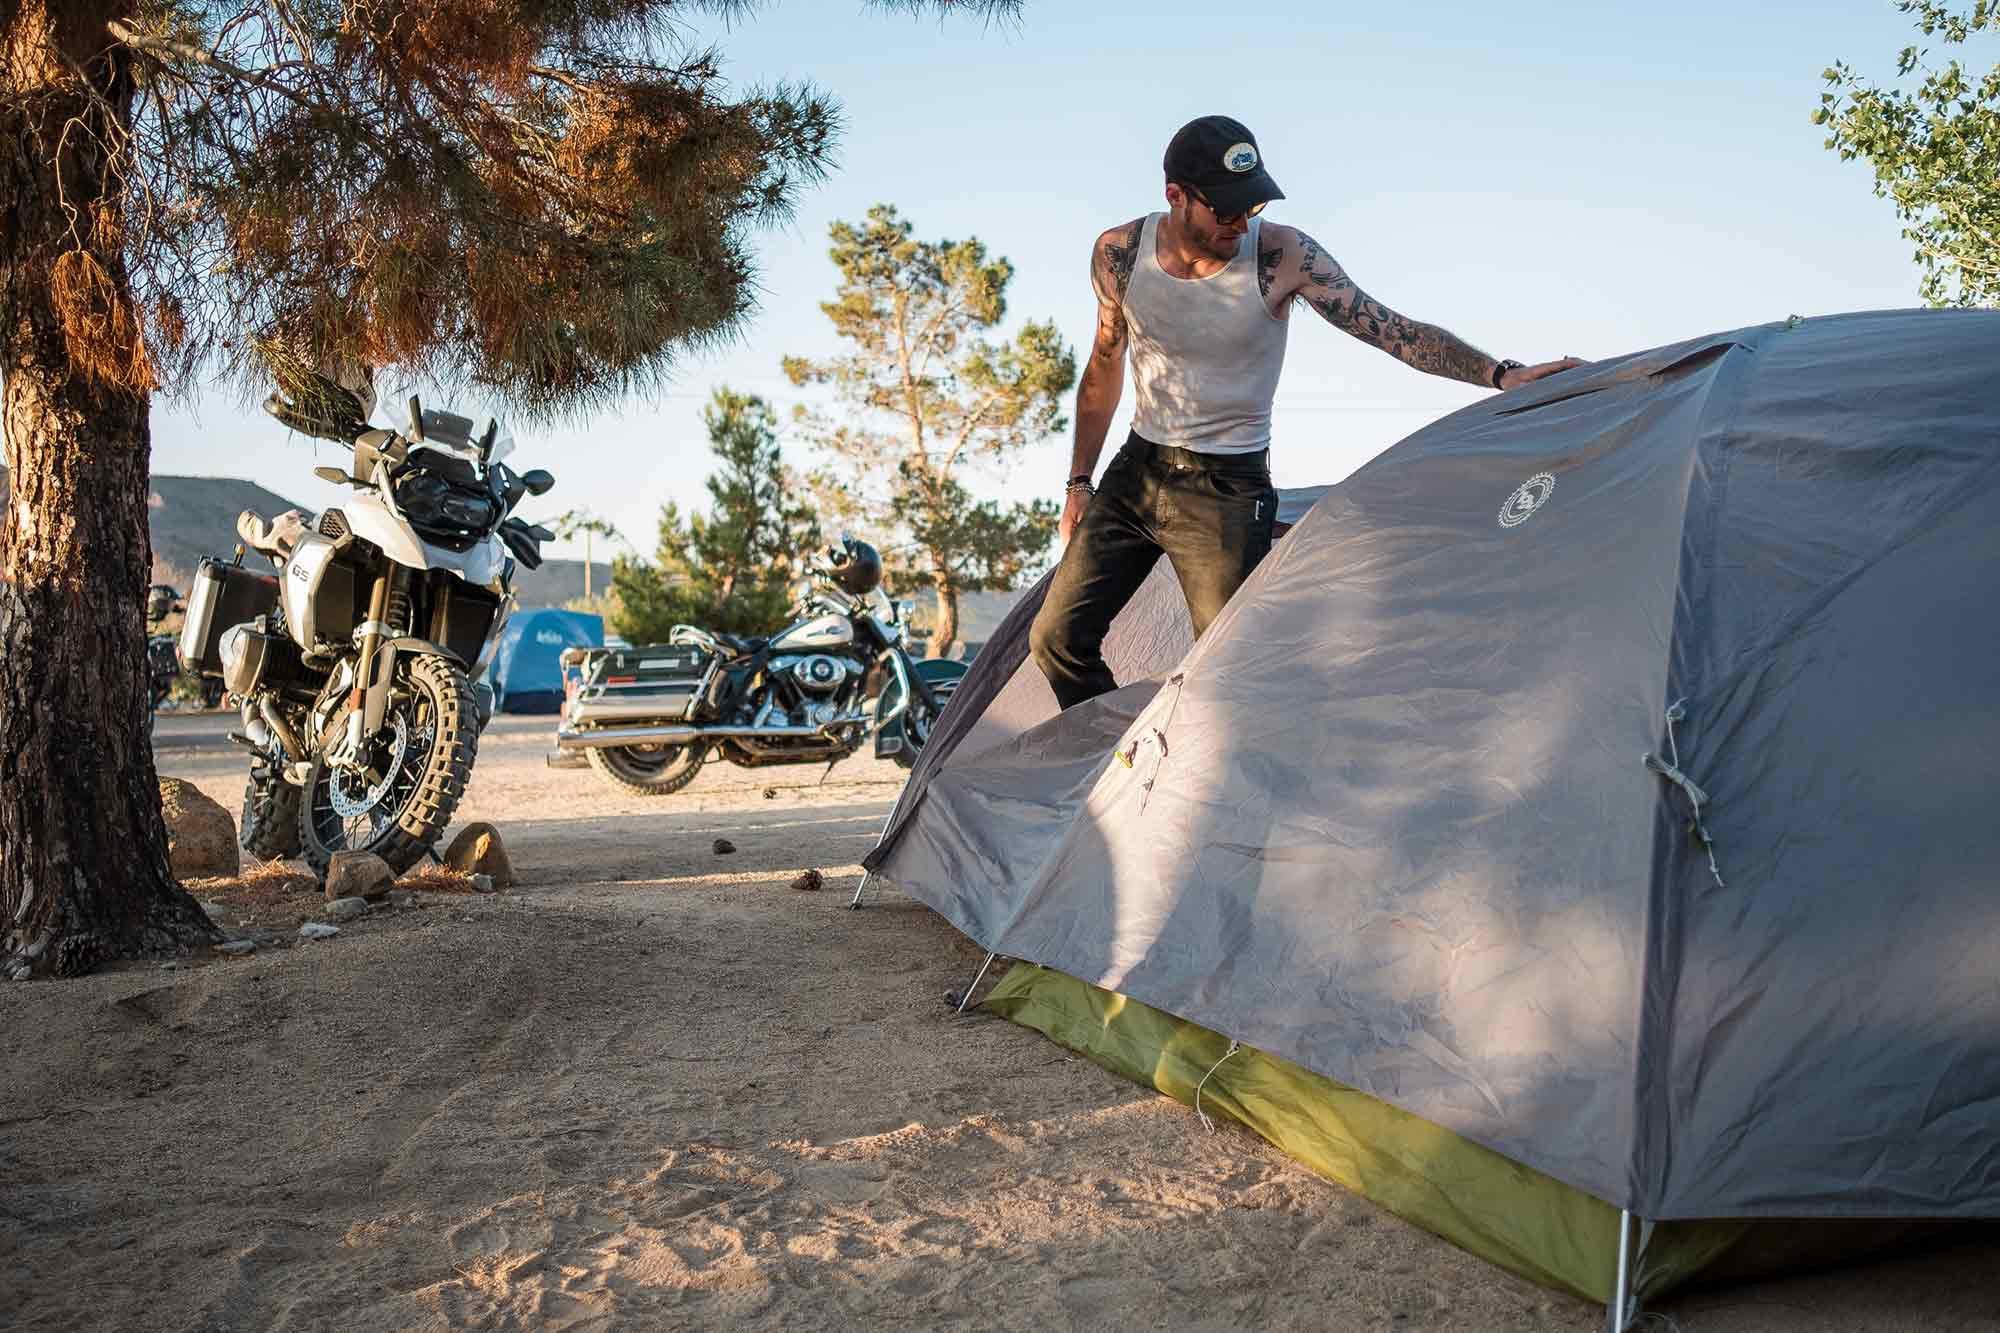 This Big Agnes Bikepacking 3 tent has been with me for many journeys. It sets up easily, packs up small, and best of all, straps right to the bike with no added equipment.